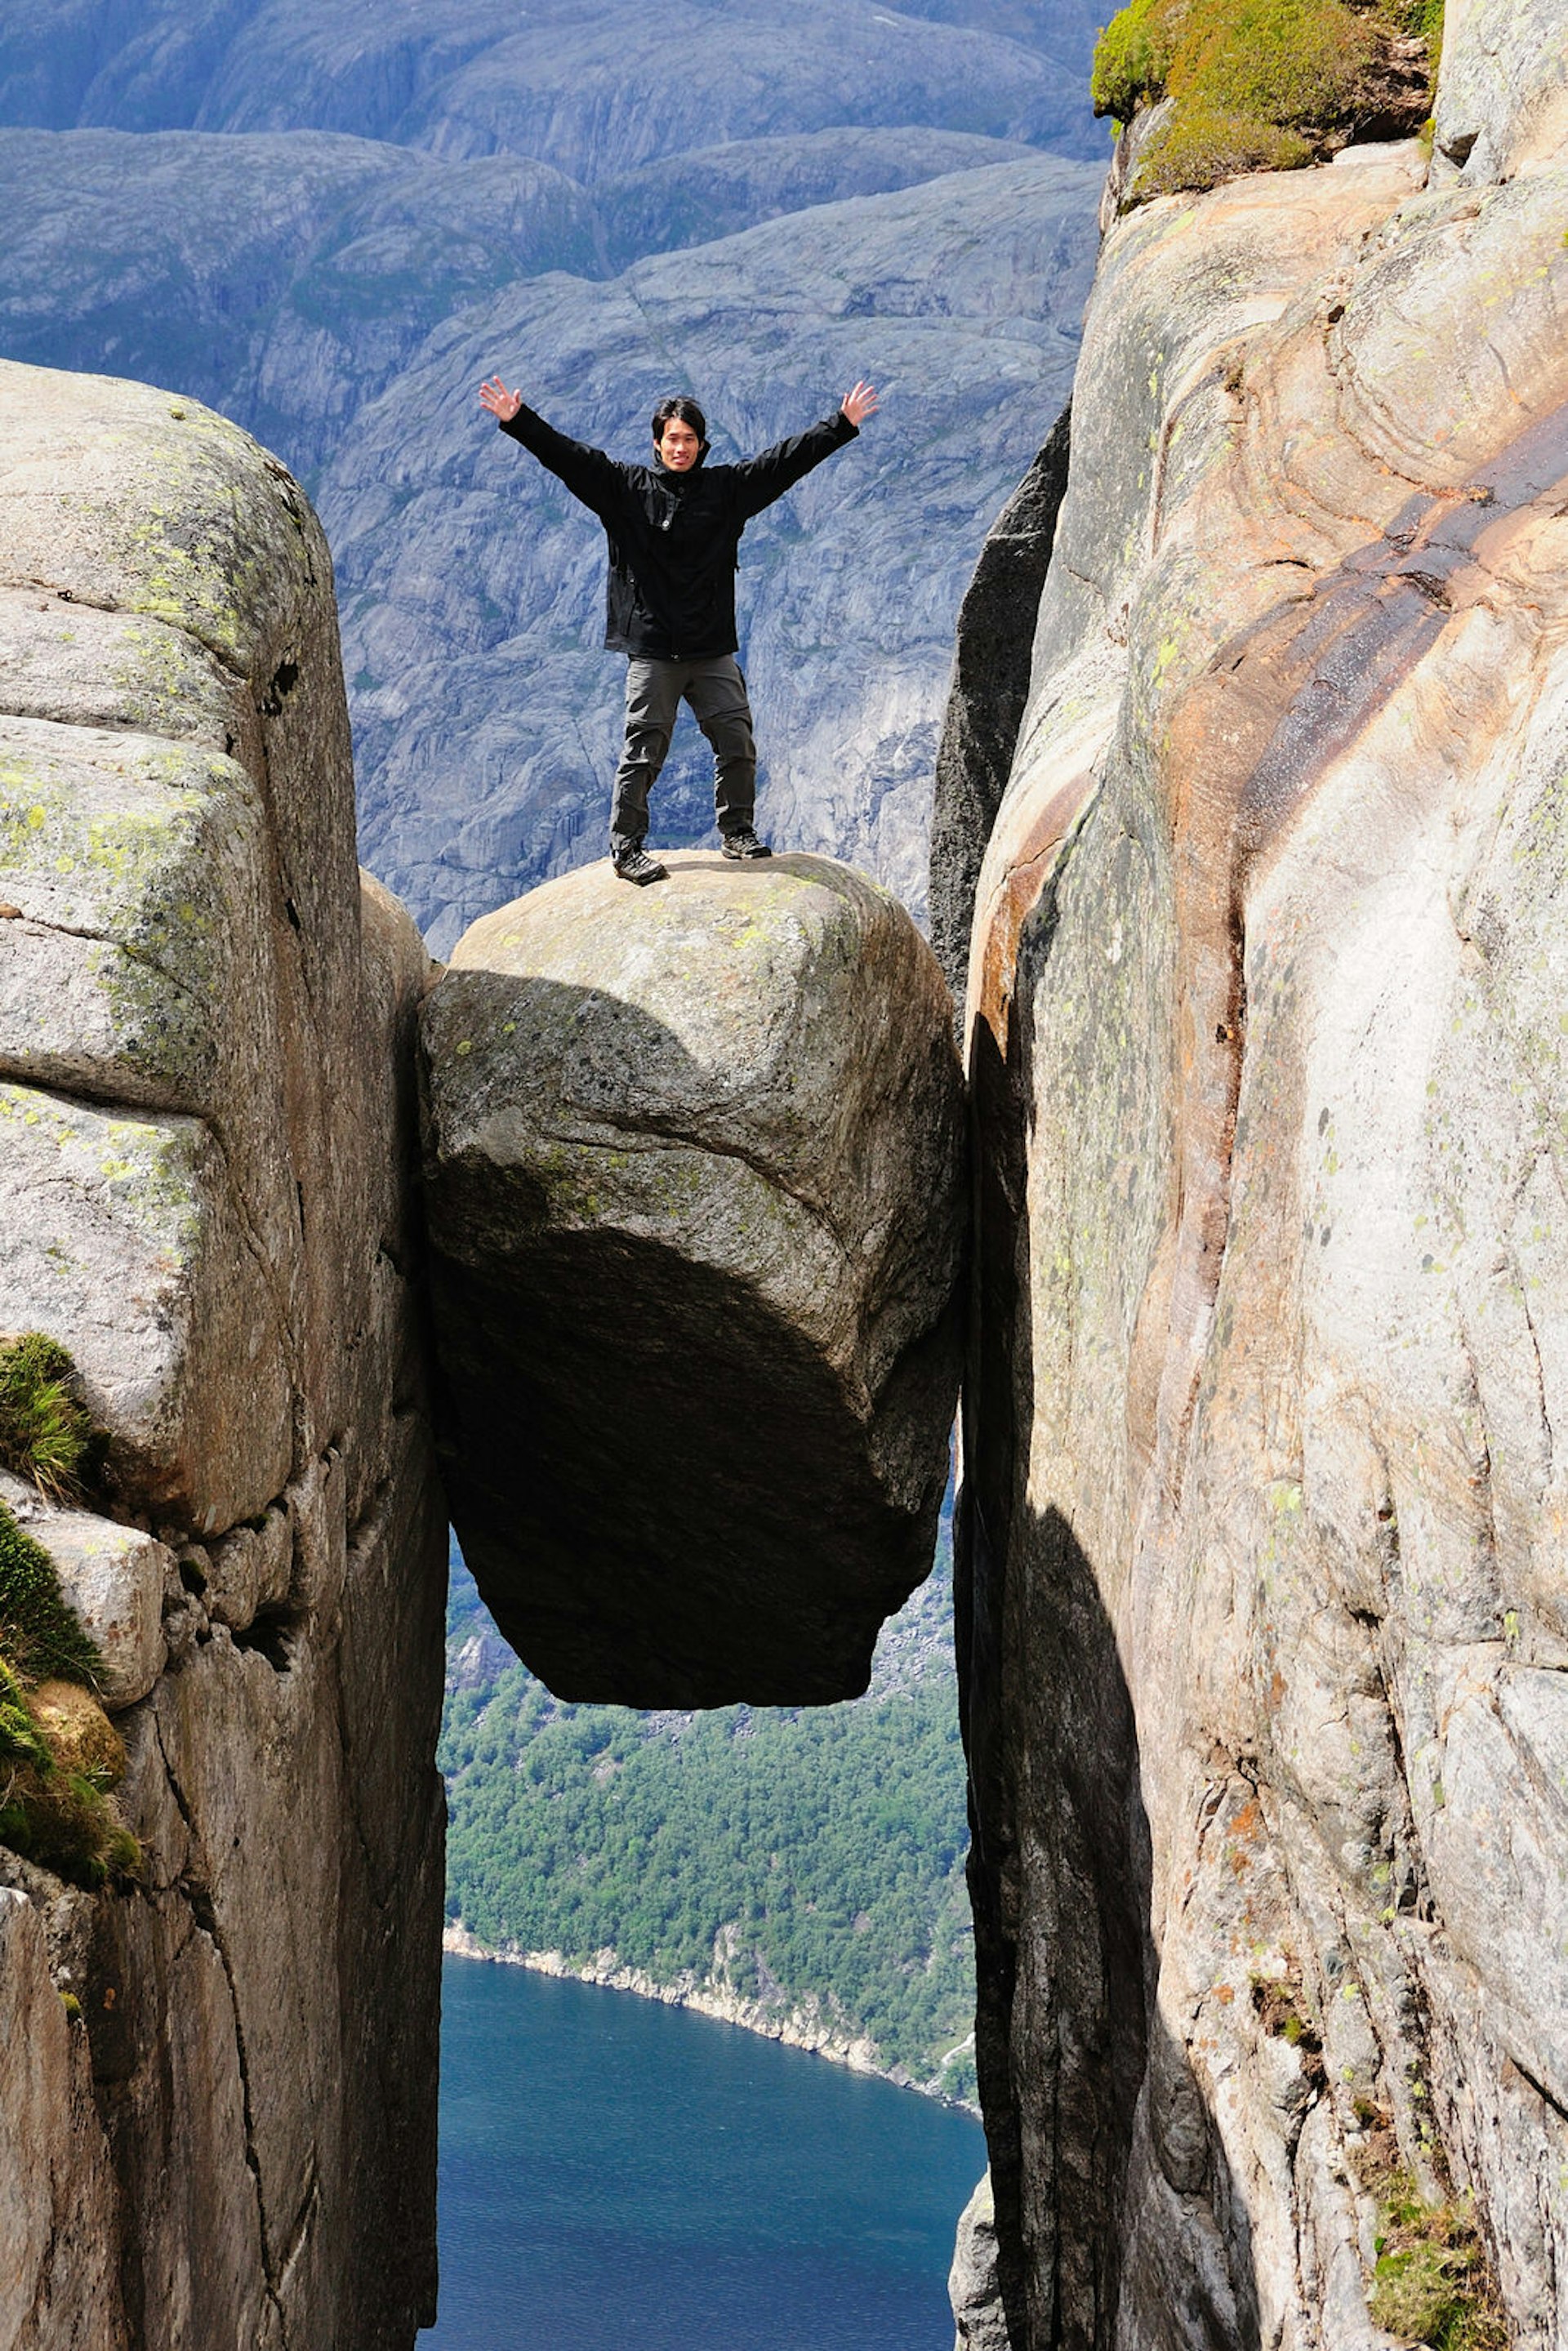 A man posing for a photo on top of the Kjeragbolten, a huge boulder gripped between two cliffs in Norway